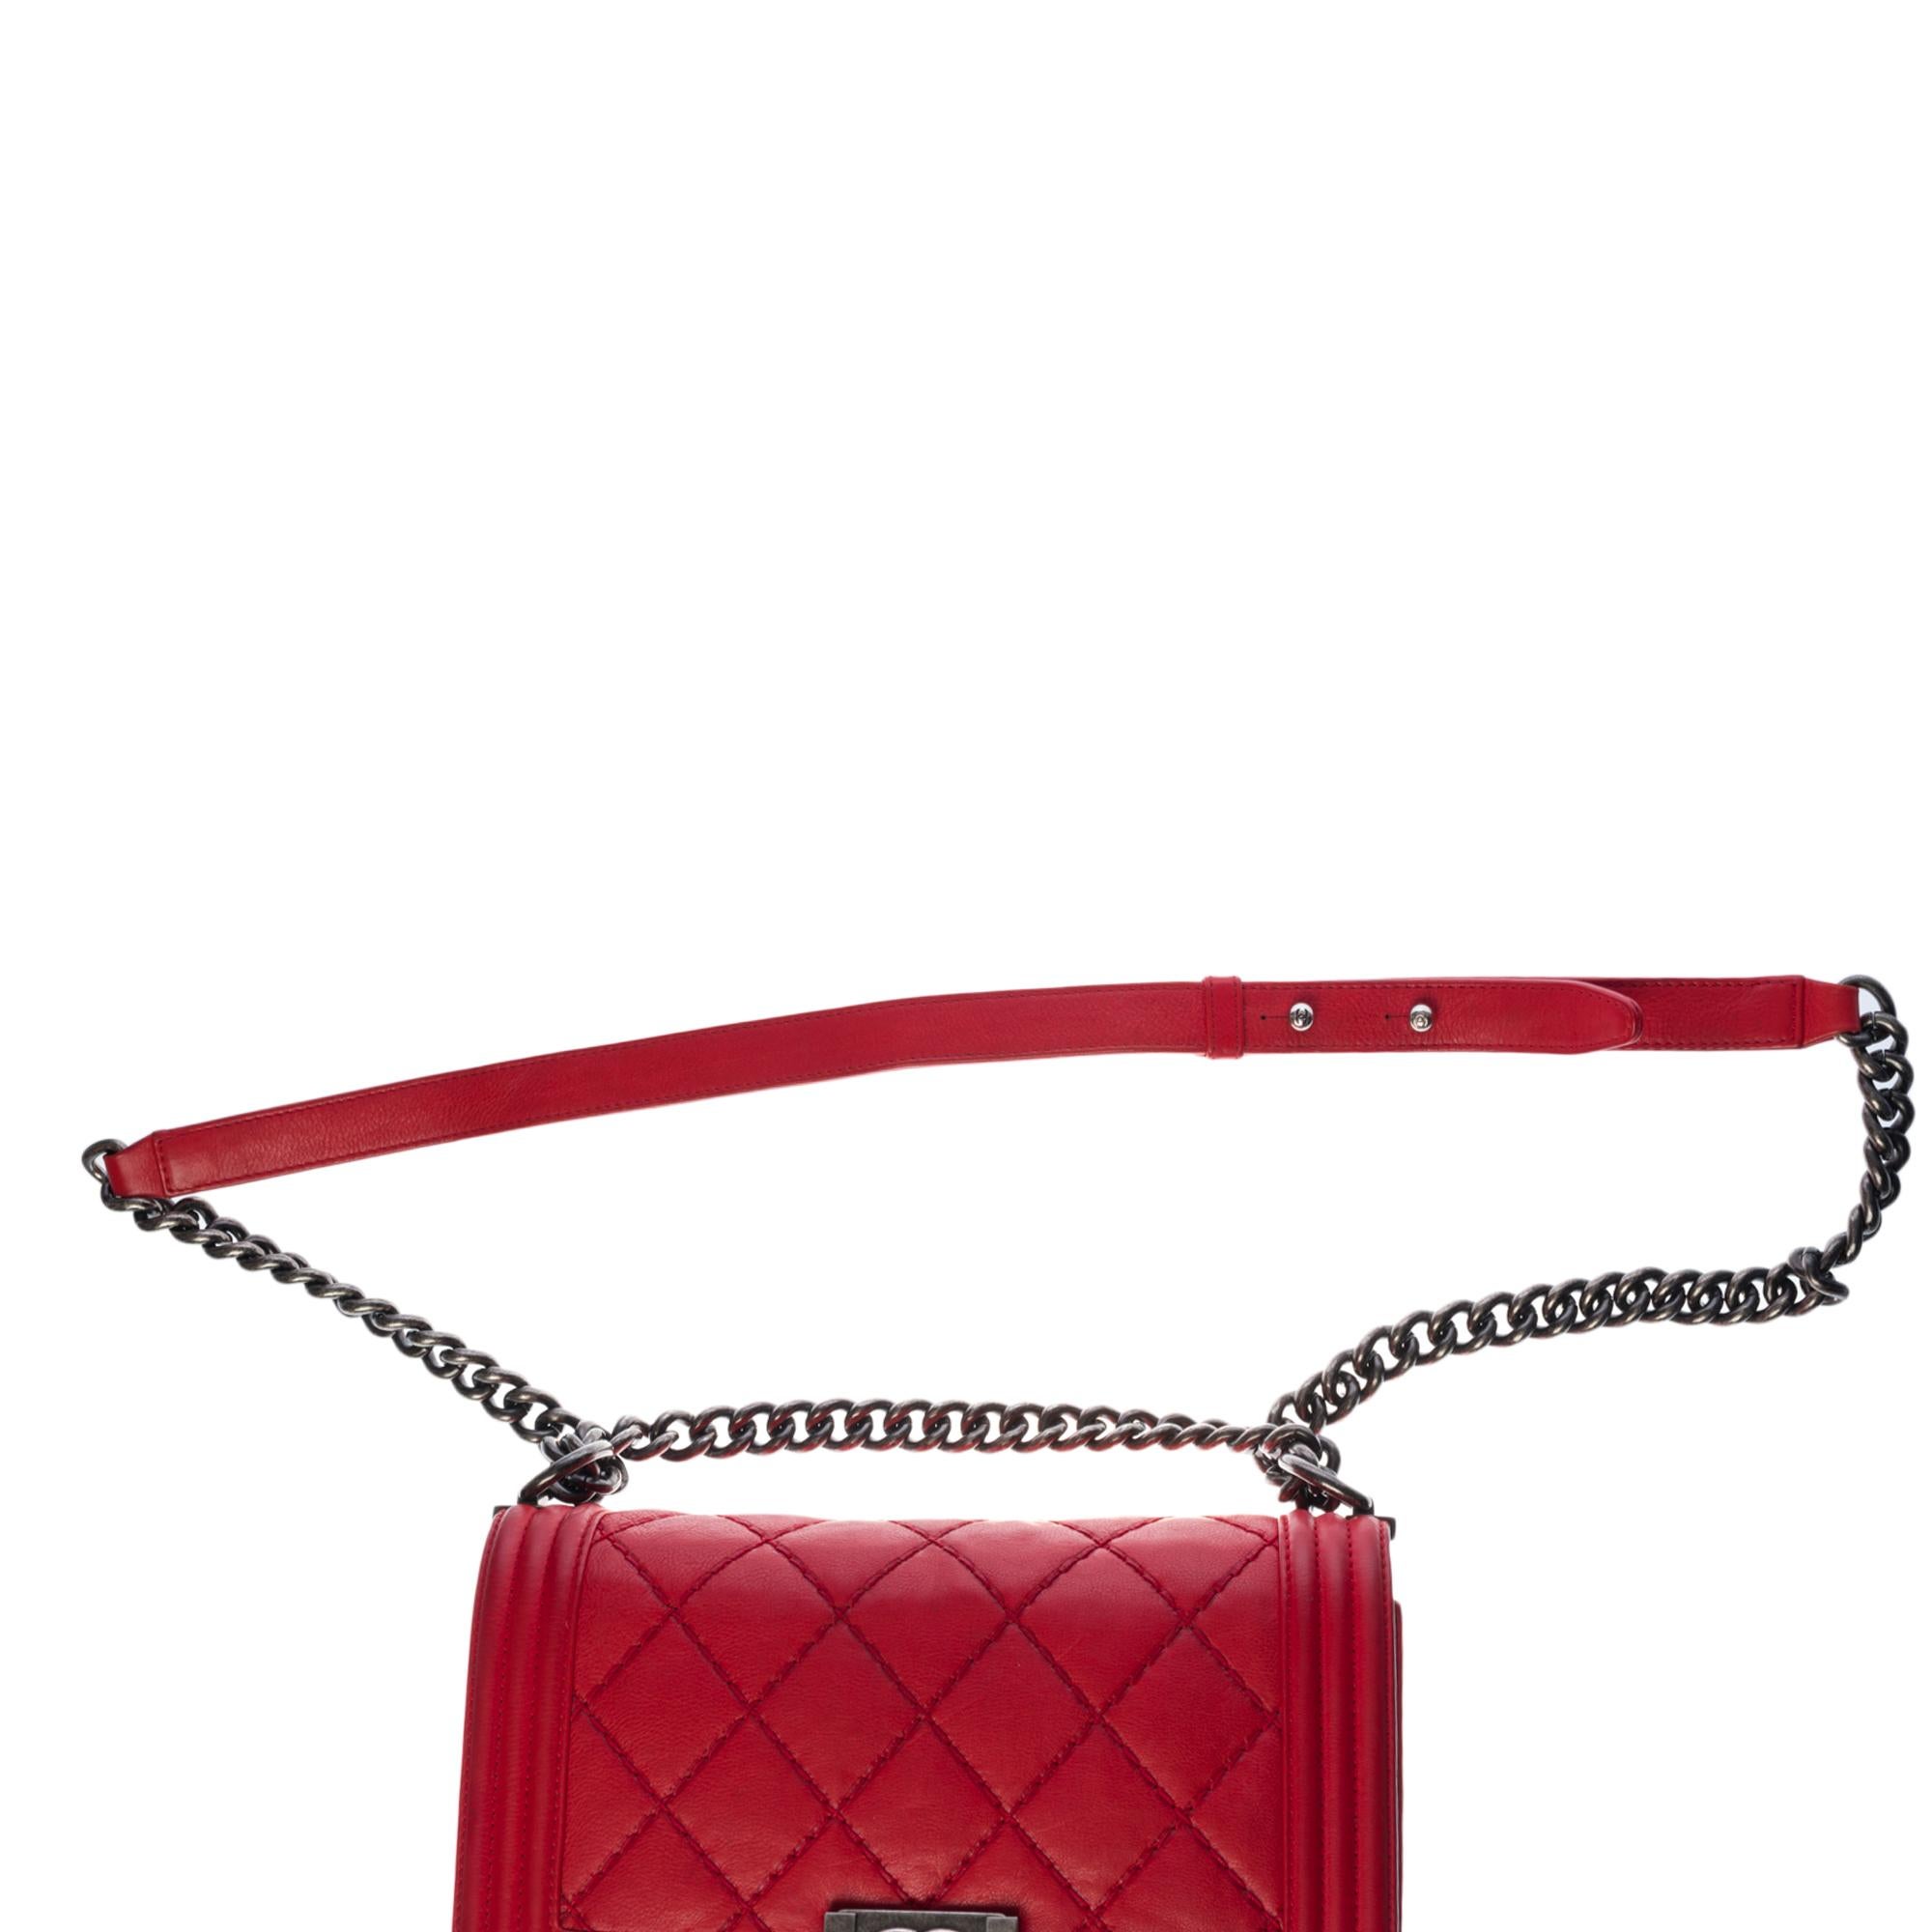 Women's Amazing Chanel Boy Old medium shoulder bag in red quilted leather, SHW